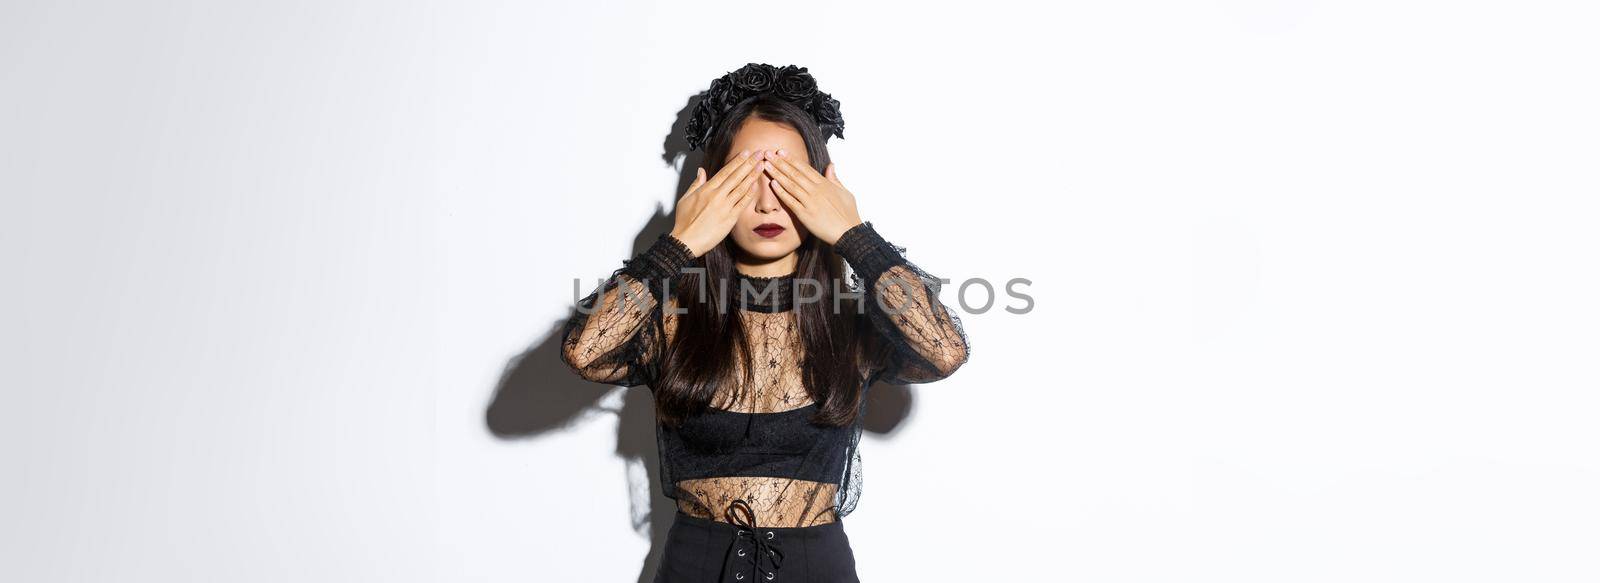 Image of woman wearing gothic wreath and black lace dress shut her eyes with hands, waiting for surprise on halloween, standing over white background with patient expression by Benzoix